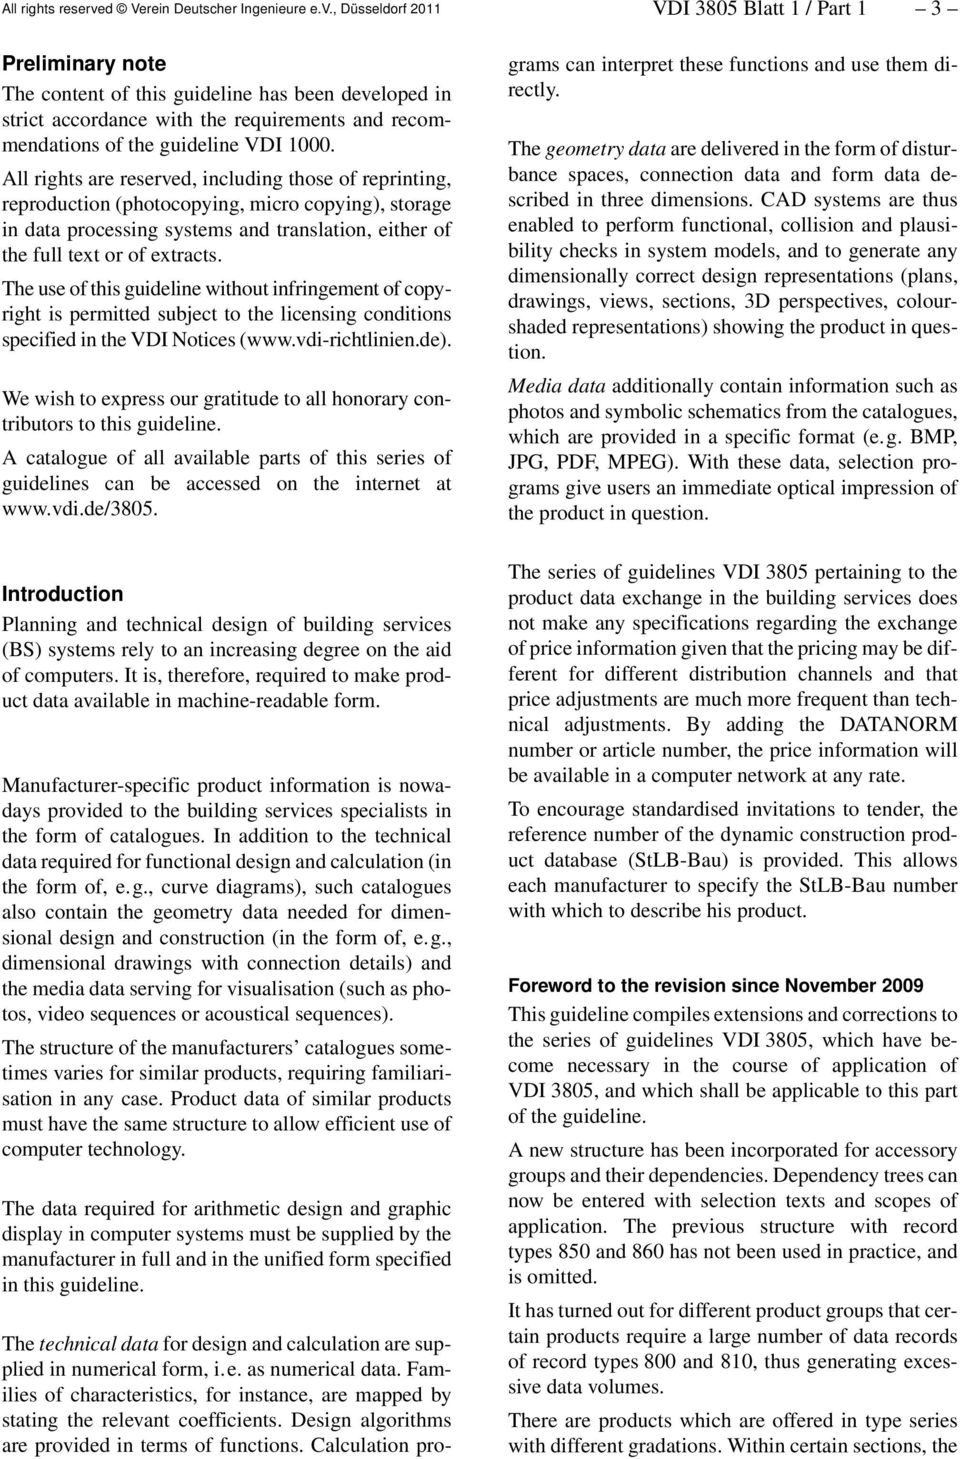 , Düsseldorf 2011 VDI 3805 Blatt 1 / Part 1 3 Preliminary note The content of this guideline has been developed in strict accordance with the requirements and recommendations of the guideline VDI